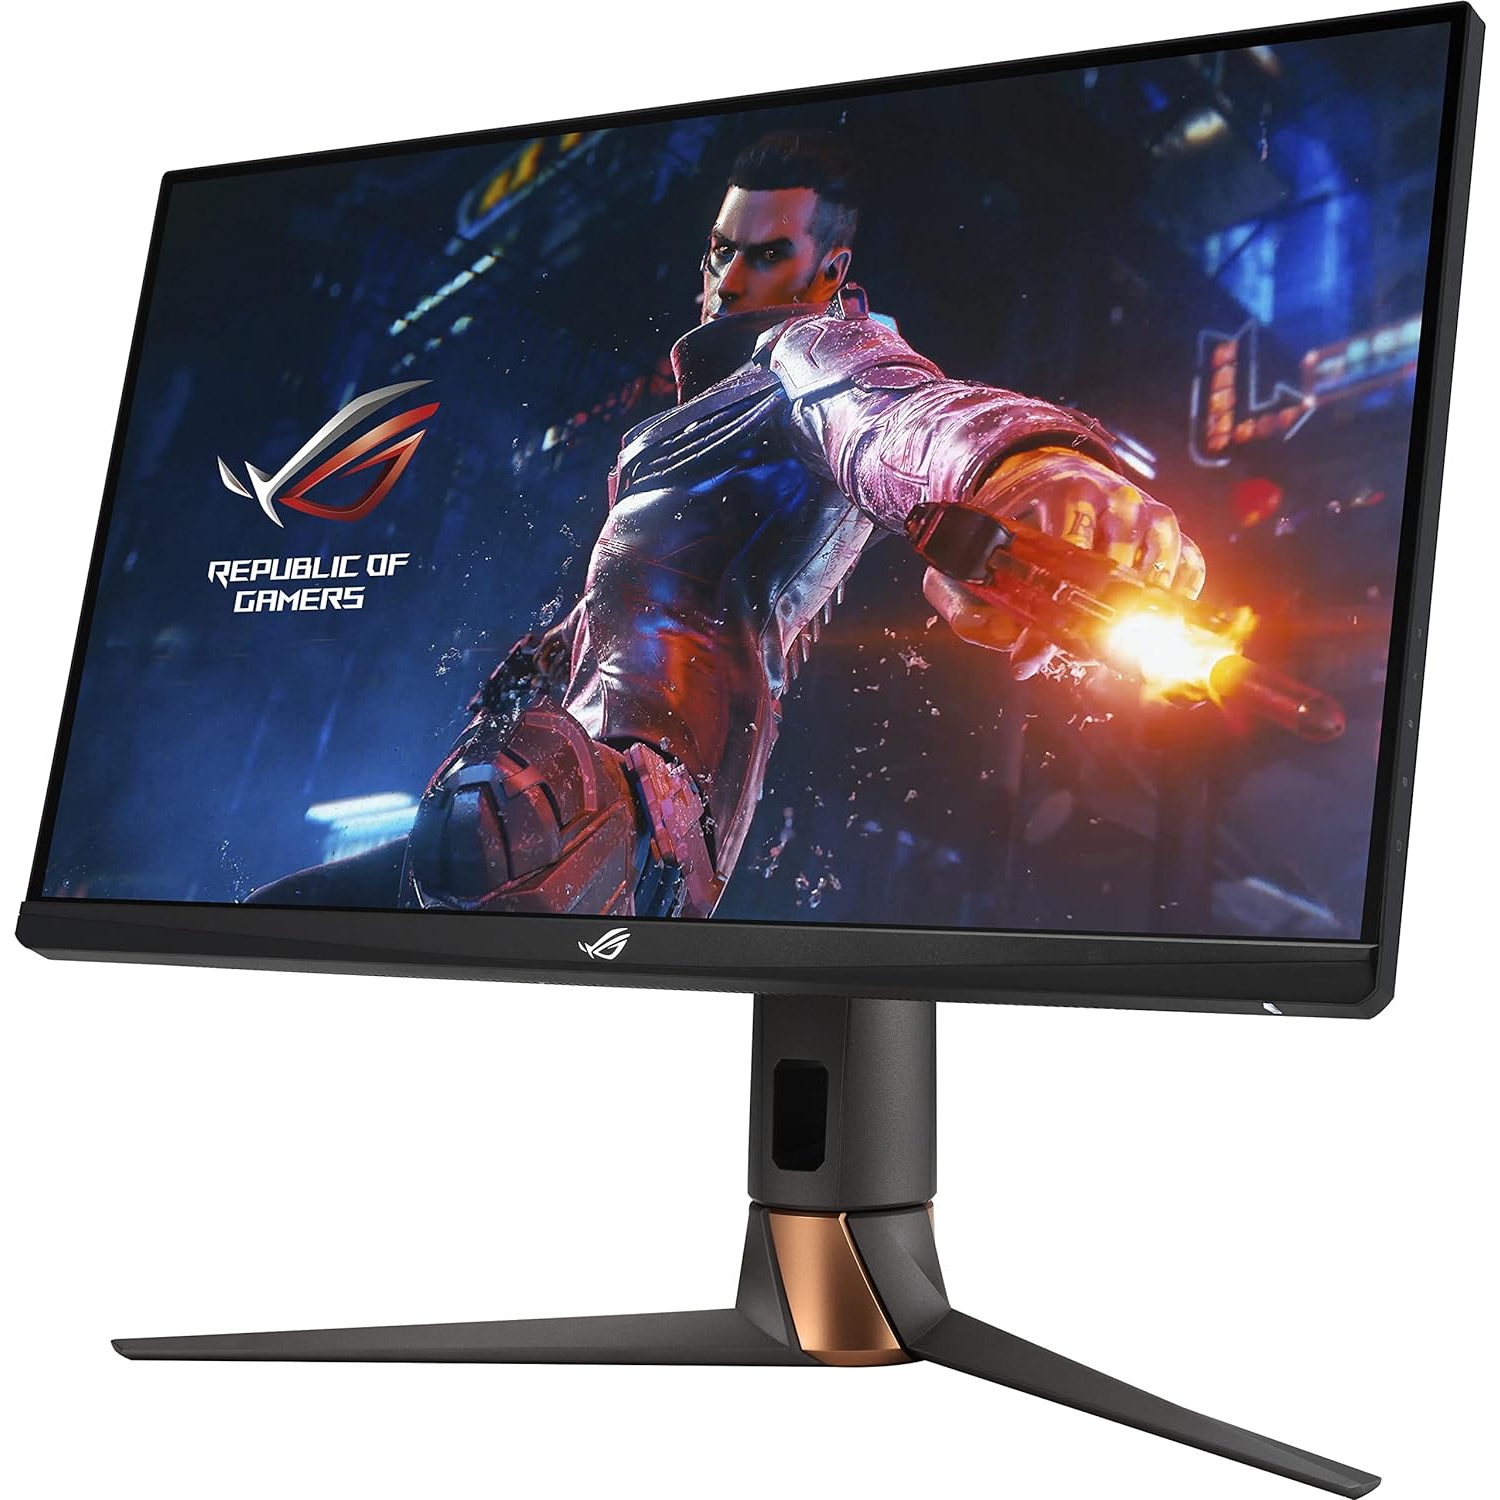 Certified Asus Refurbished - ASUS ROG Swift 27” 1440P Gaming Monitor WQHD (2560 x 1440), Fast IPS, 240Hz, 1ms, G-SYNC, Eye Care - (PG279QM) w/ 90 Days Warranty